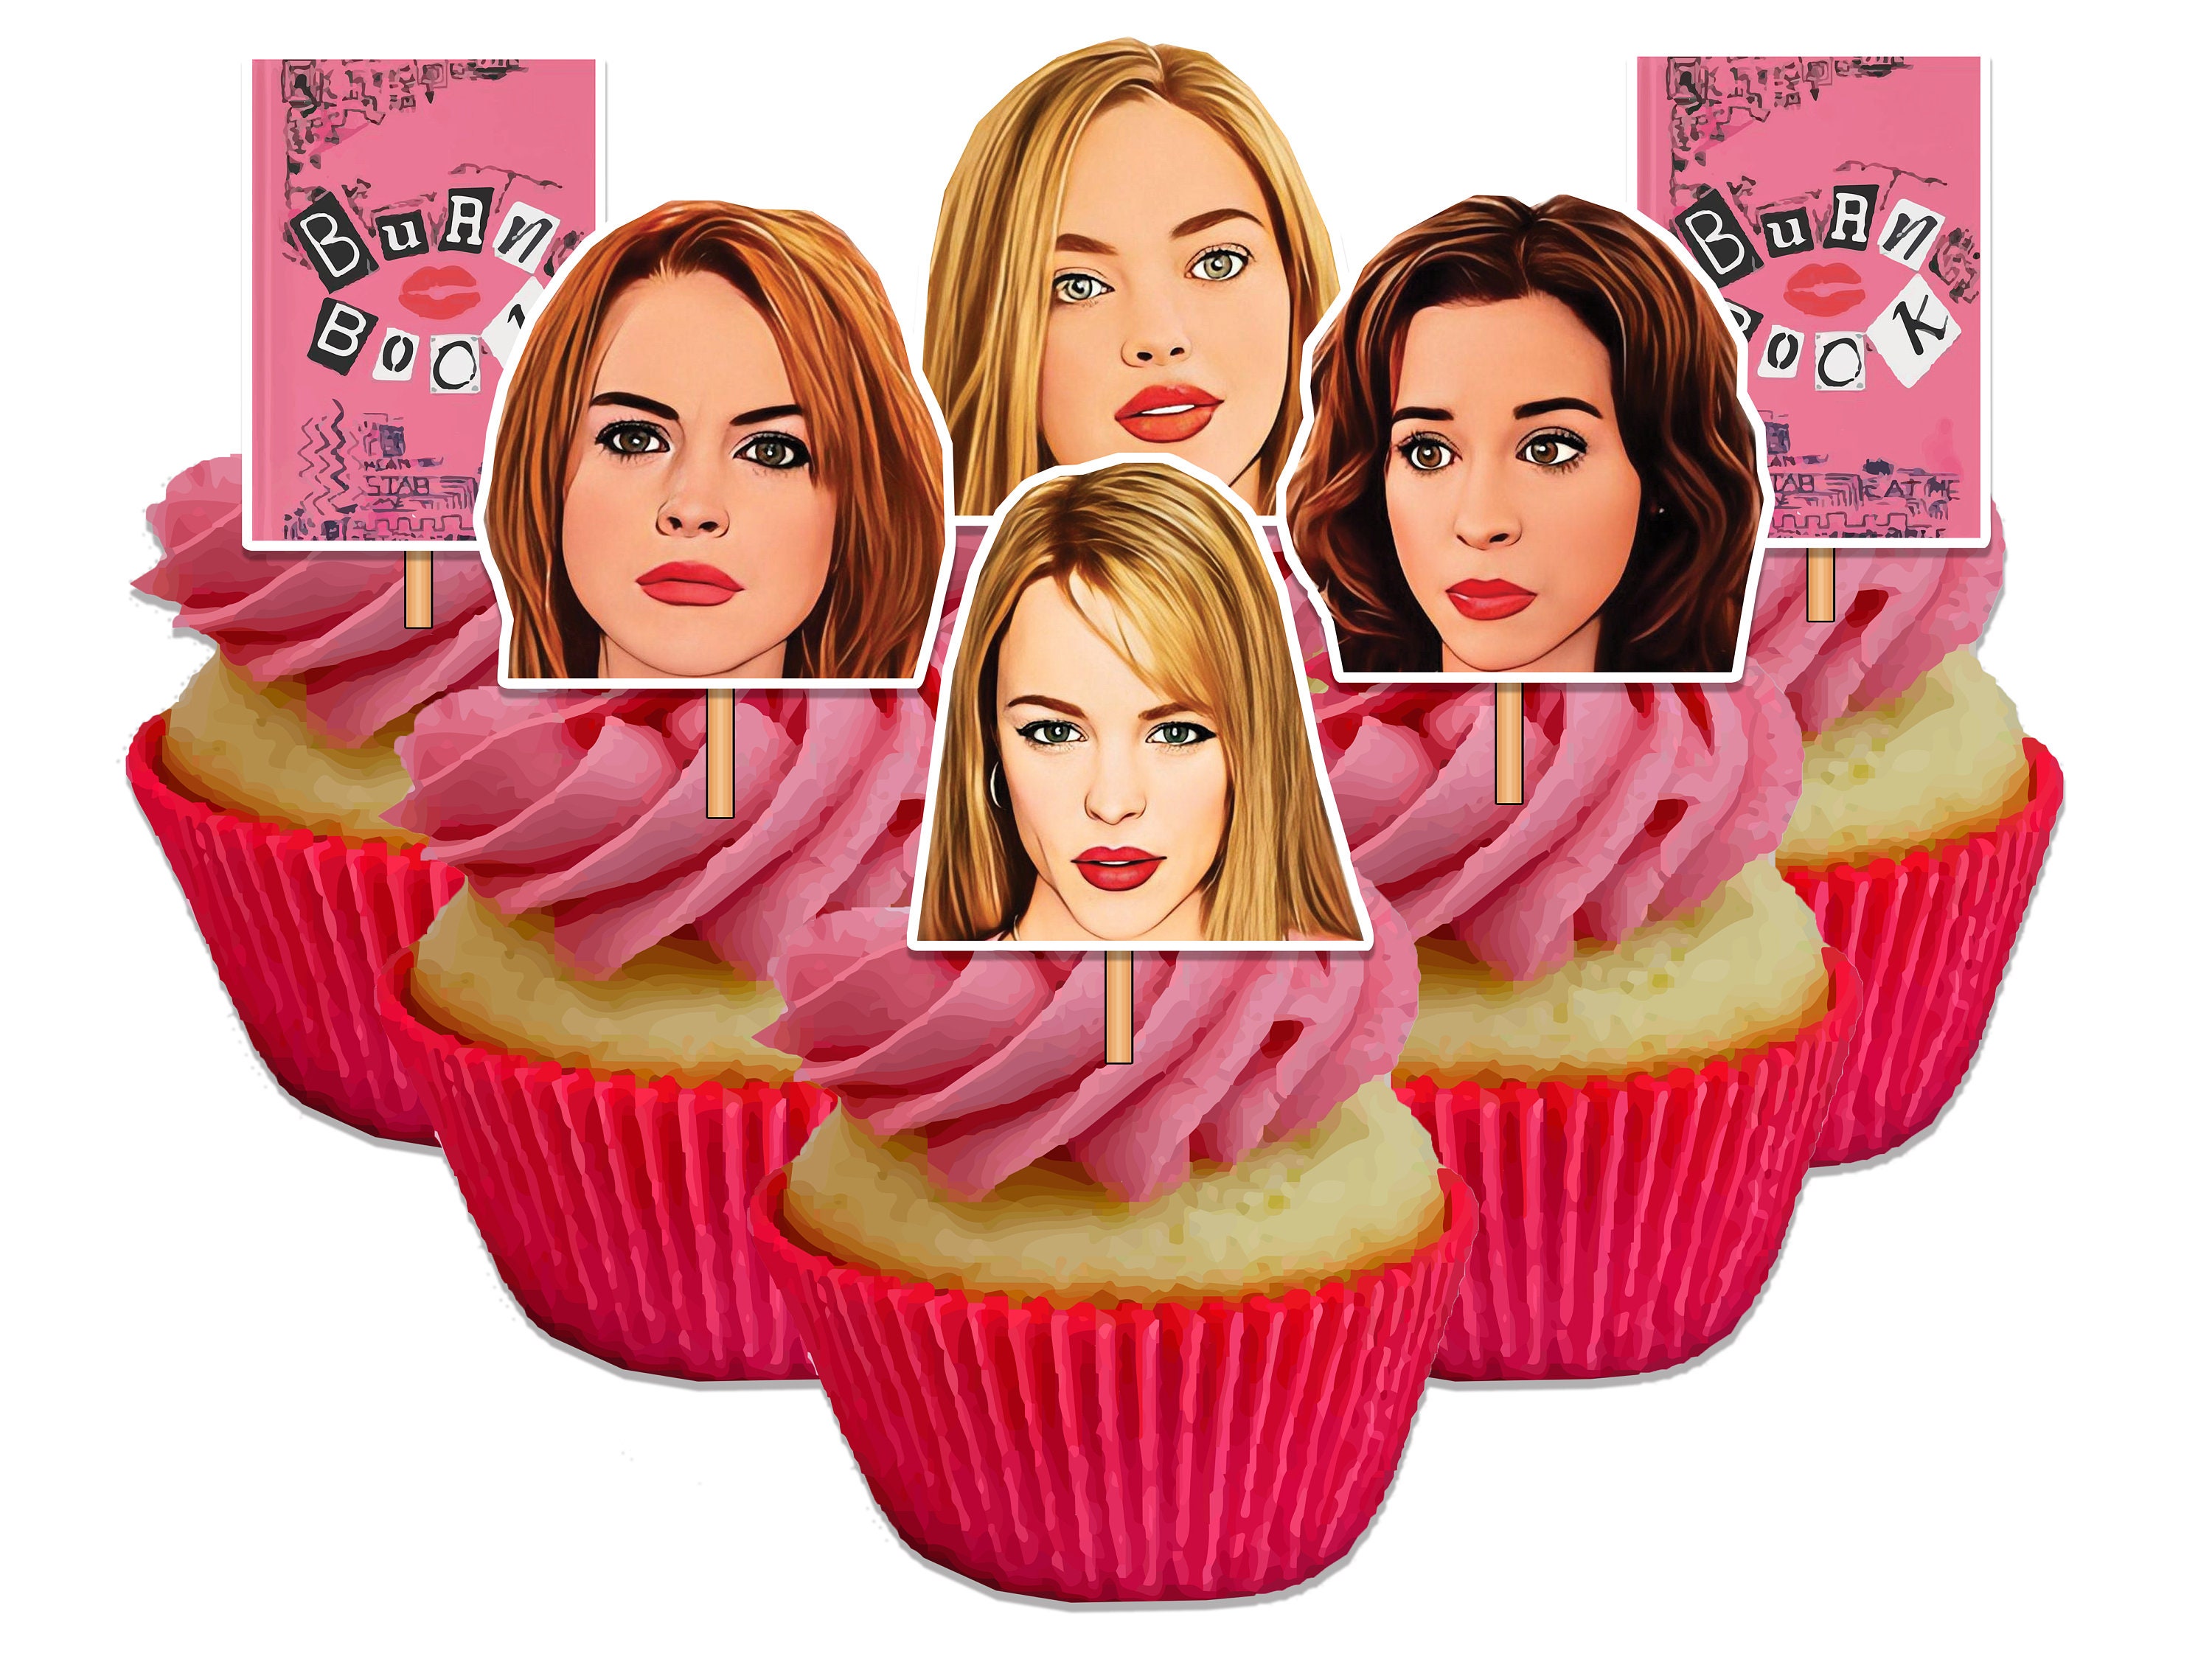 Mean Girls Party Cake Toppers 13 Pack Funny Cupcake Toppers Eco